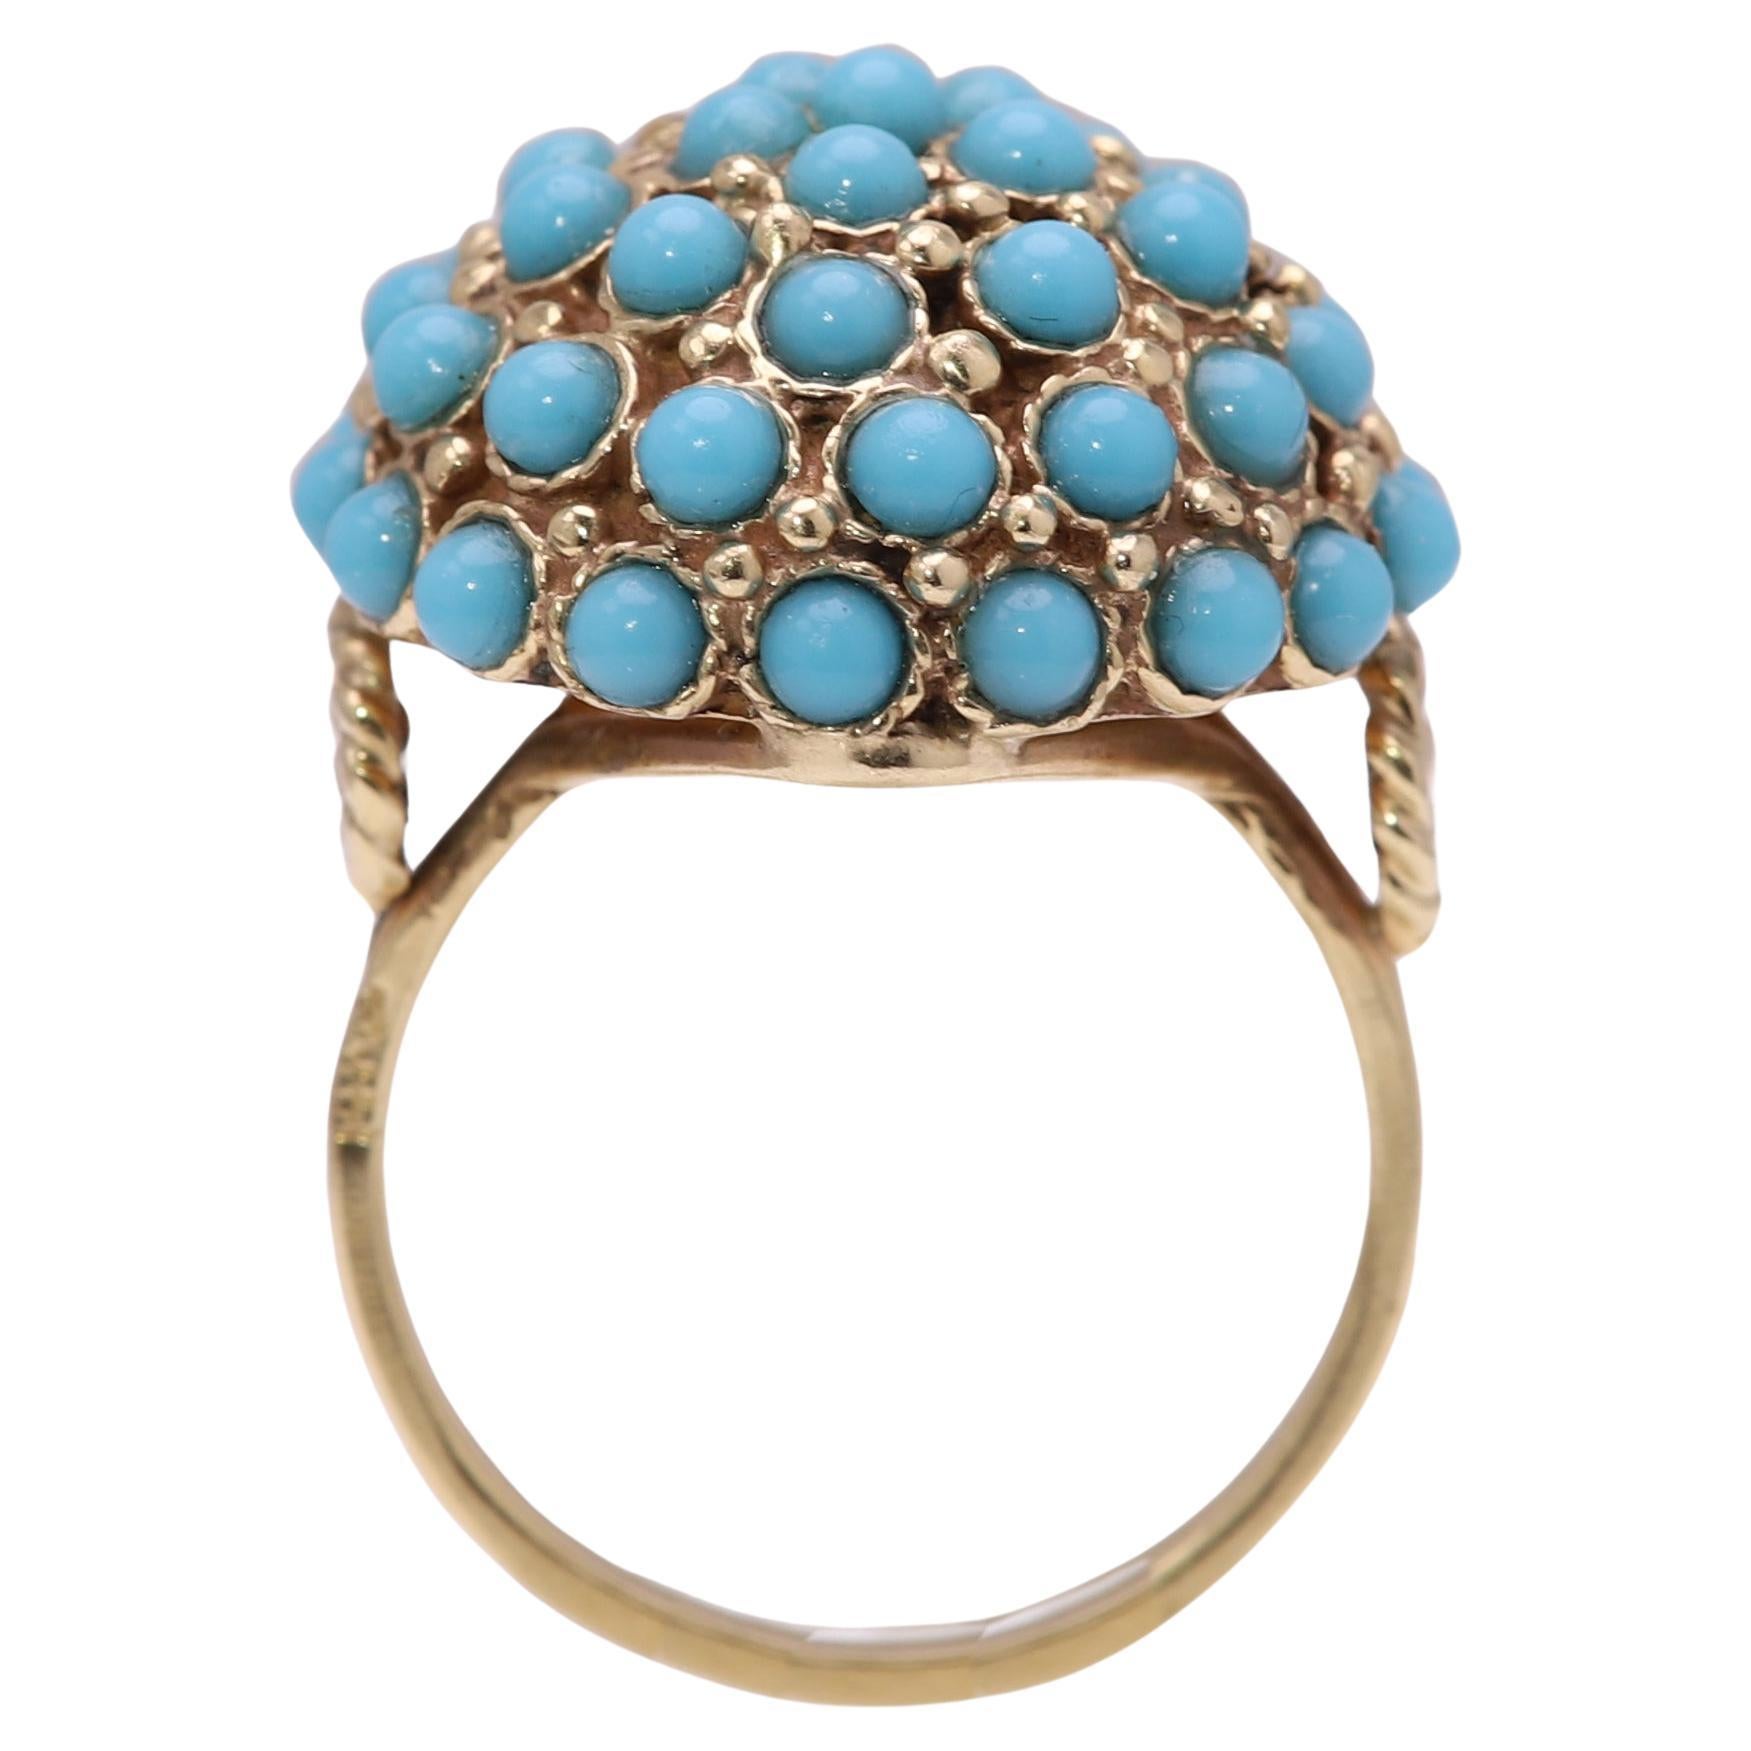 Antique Turquoise Ring 14 Karat Yellow Gold Cluster Design Persian Turquoise For Sale